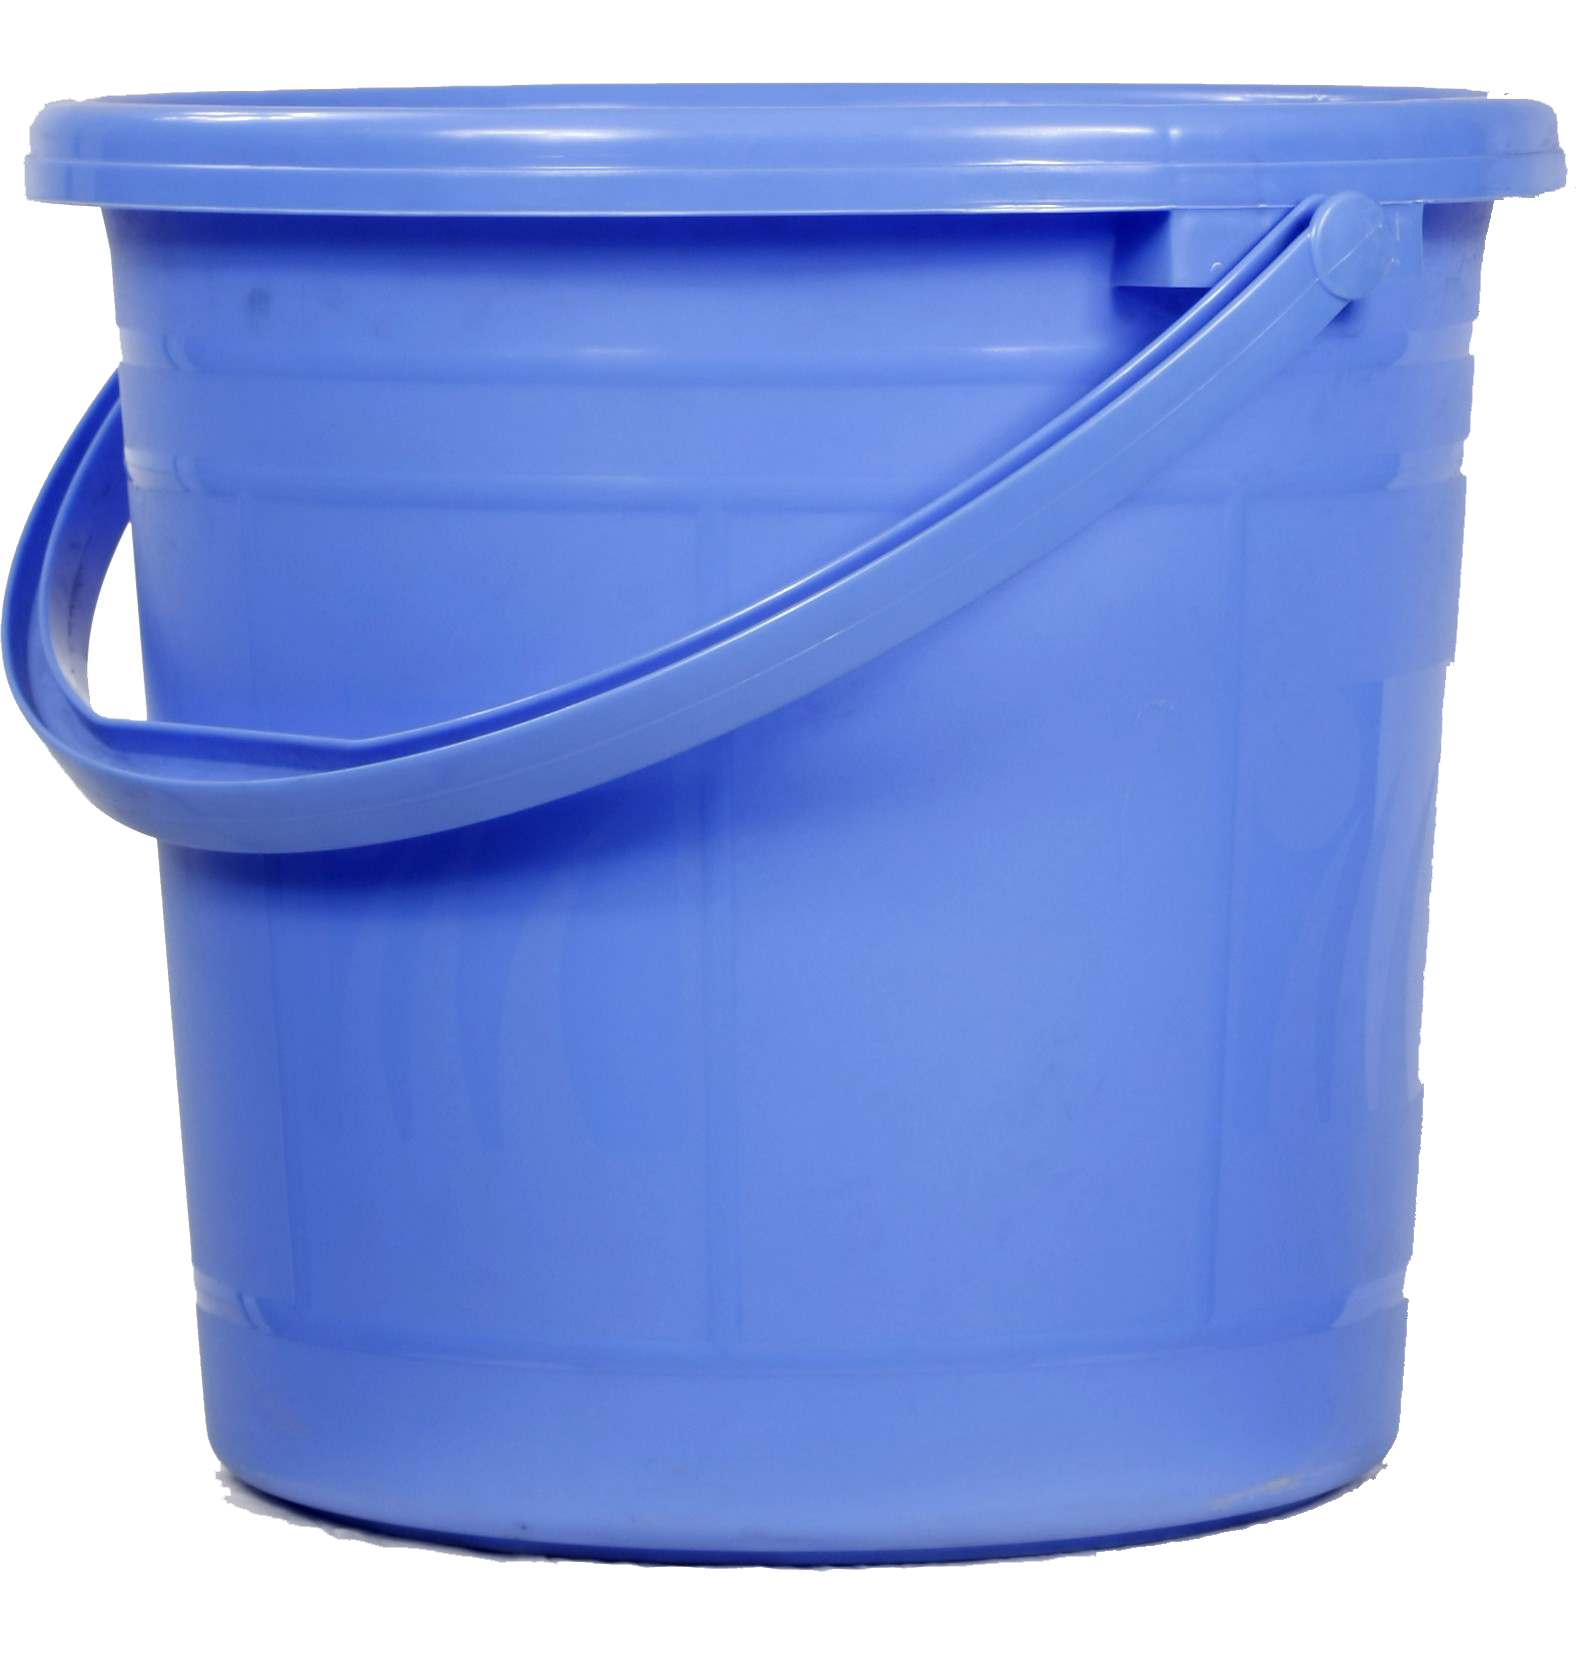 Bucket Free Download Png - Bucket, Transparent background PNG HD thumbnail